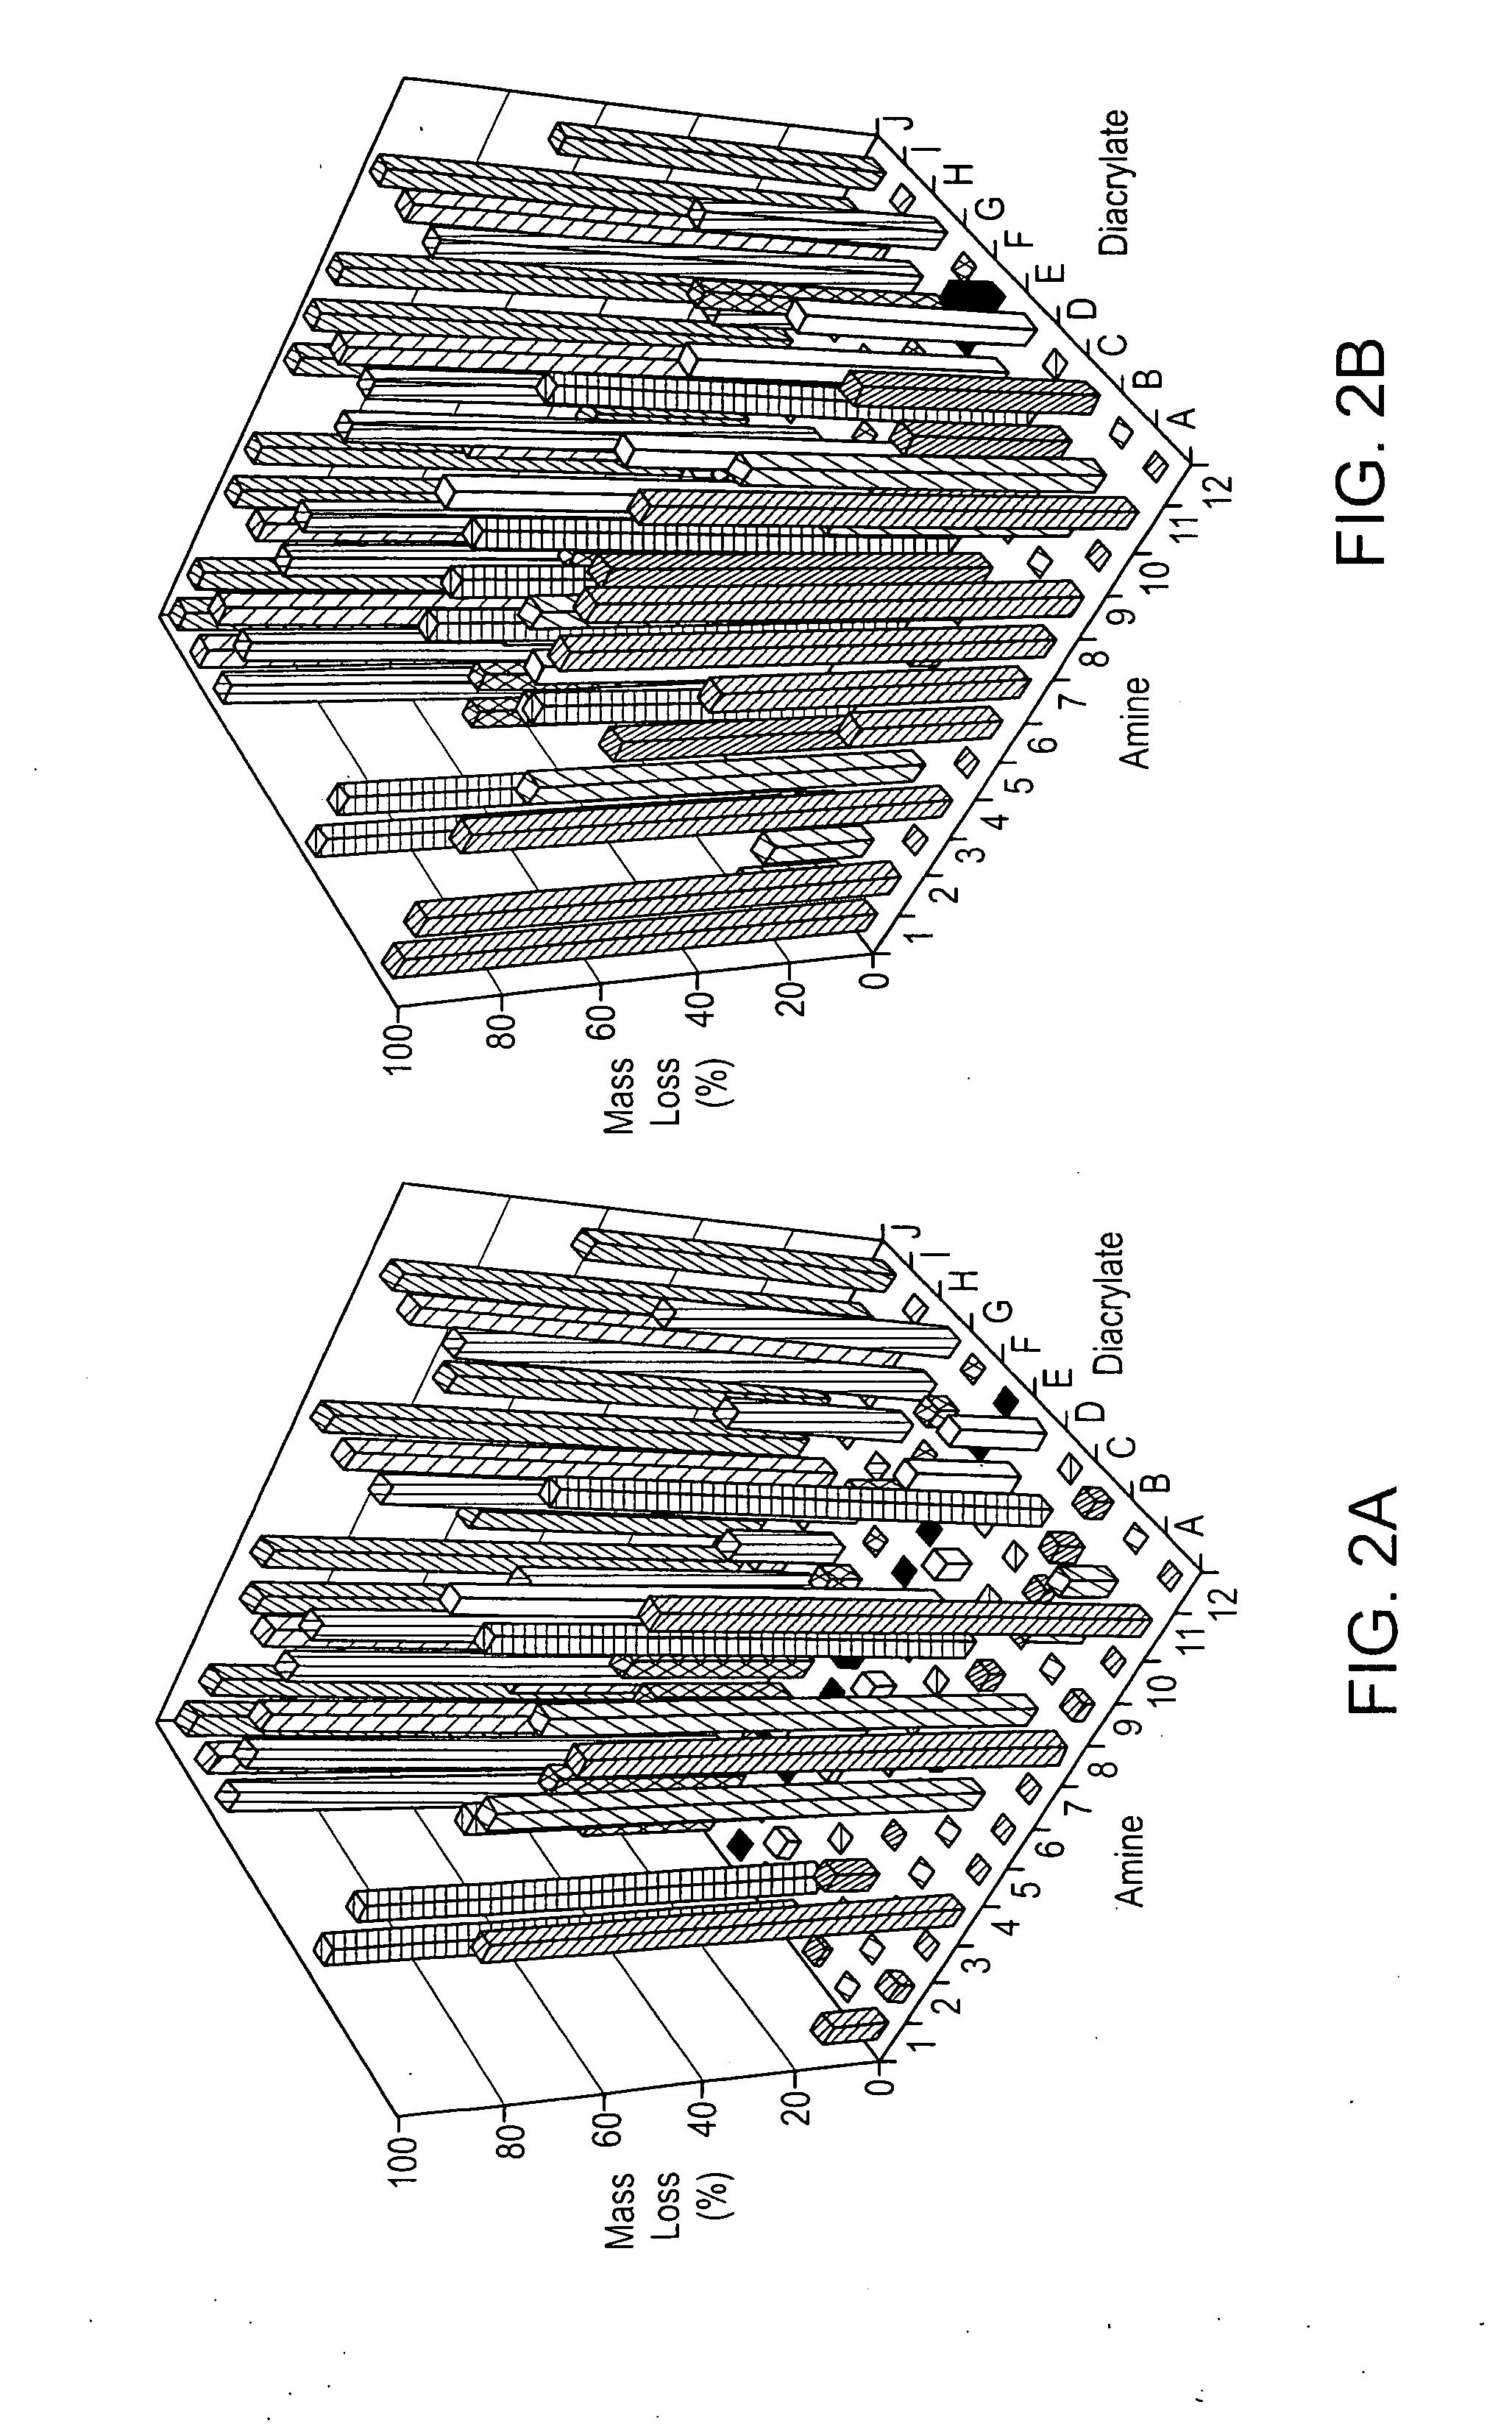 Crosslinked, degradable polymers and uses thereof